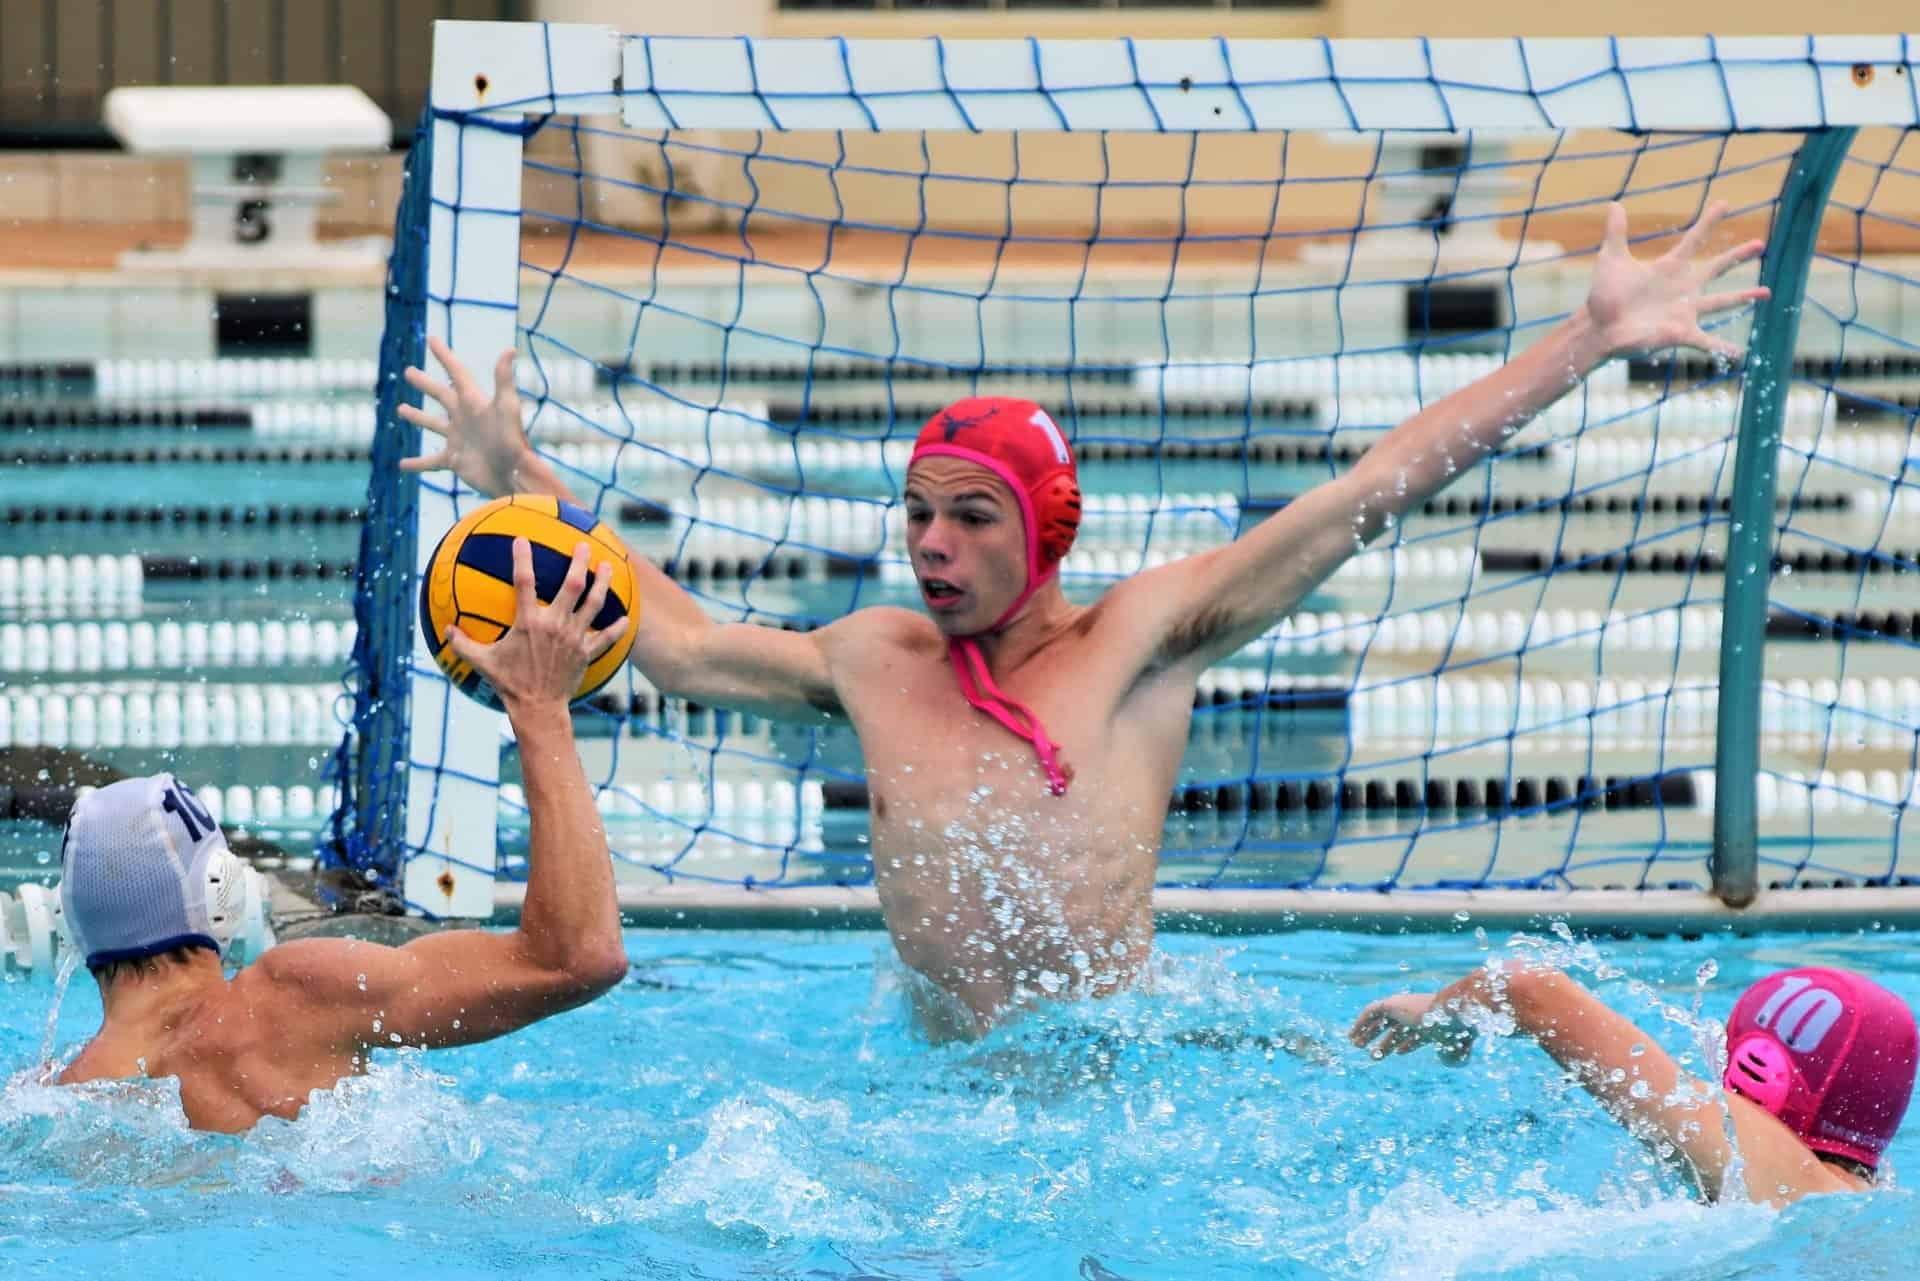 Waterpolo or water polo – rules, equipment, advantages